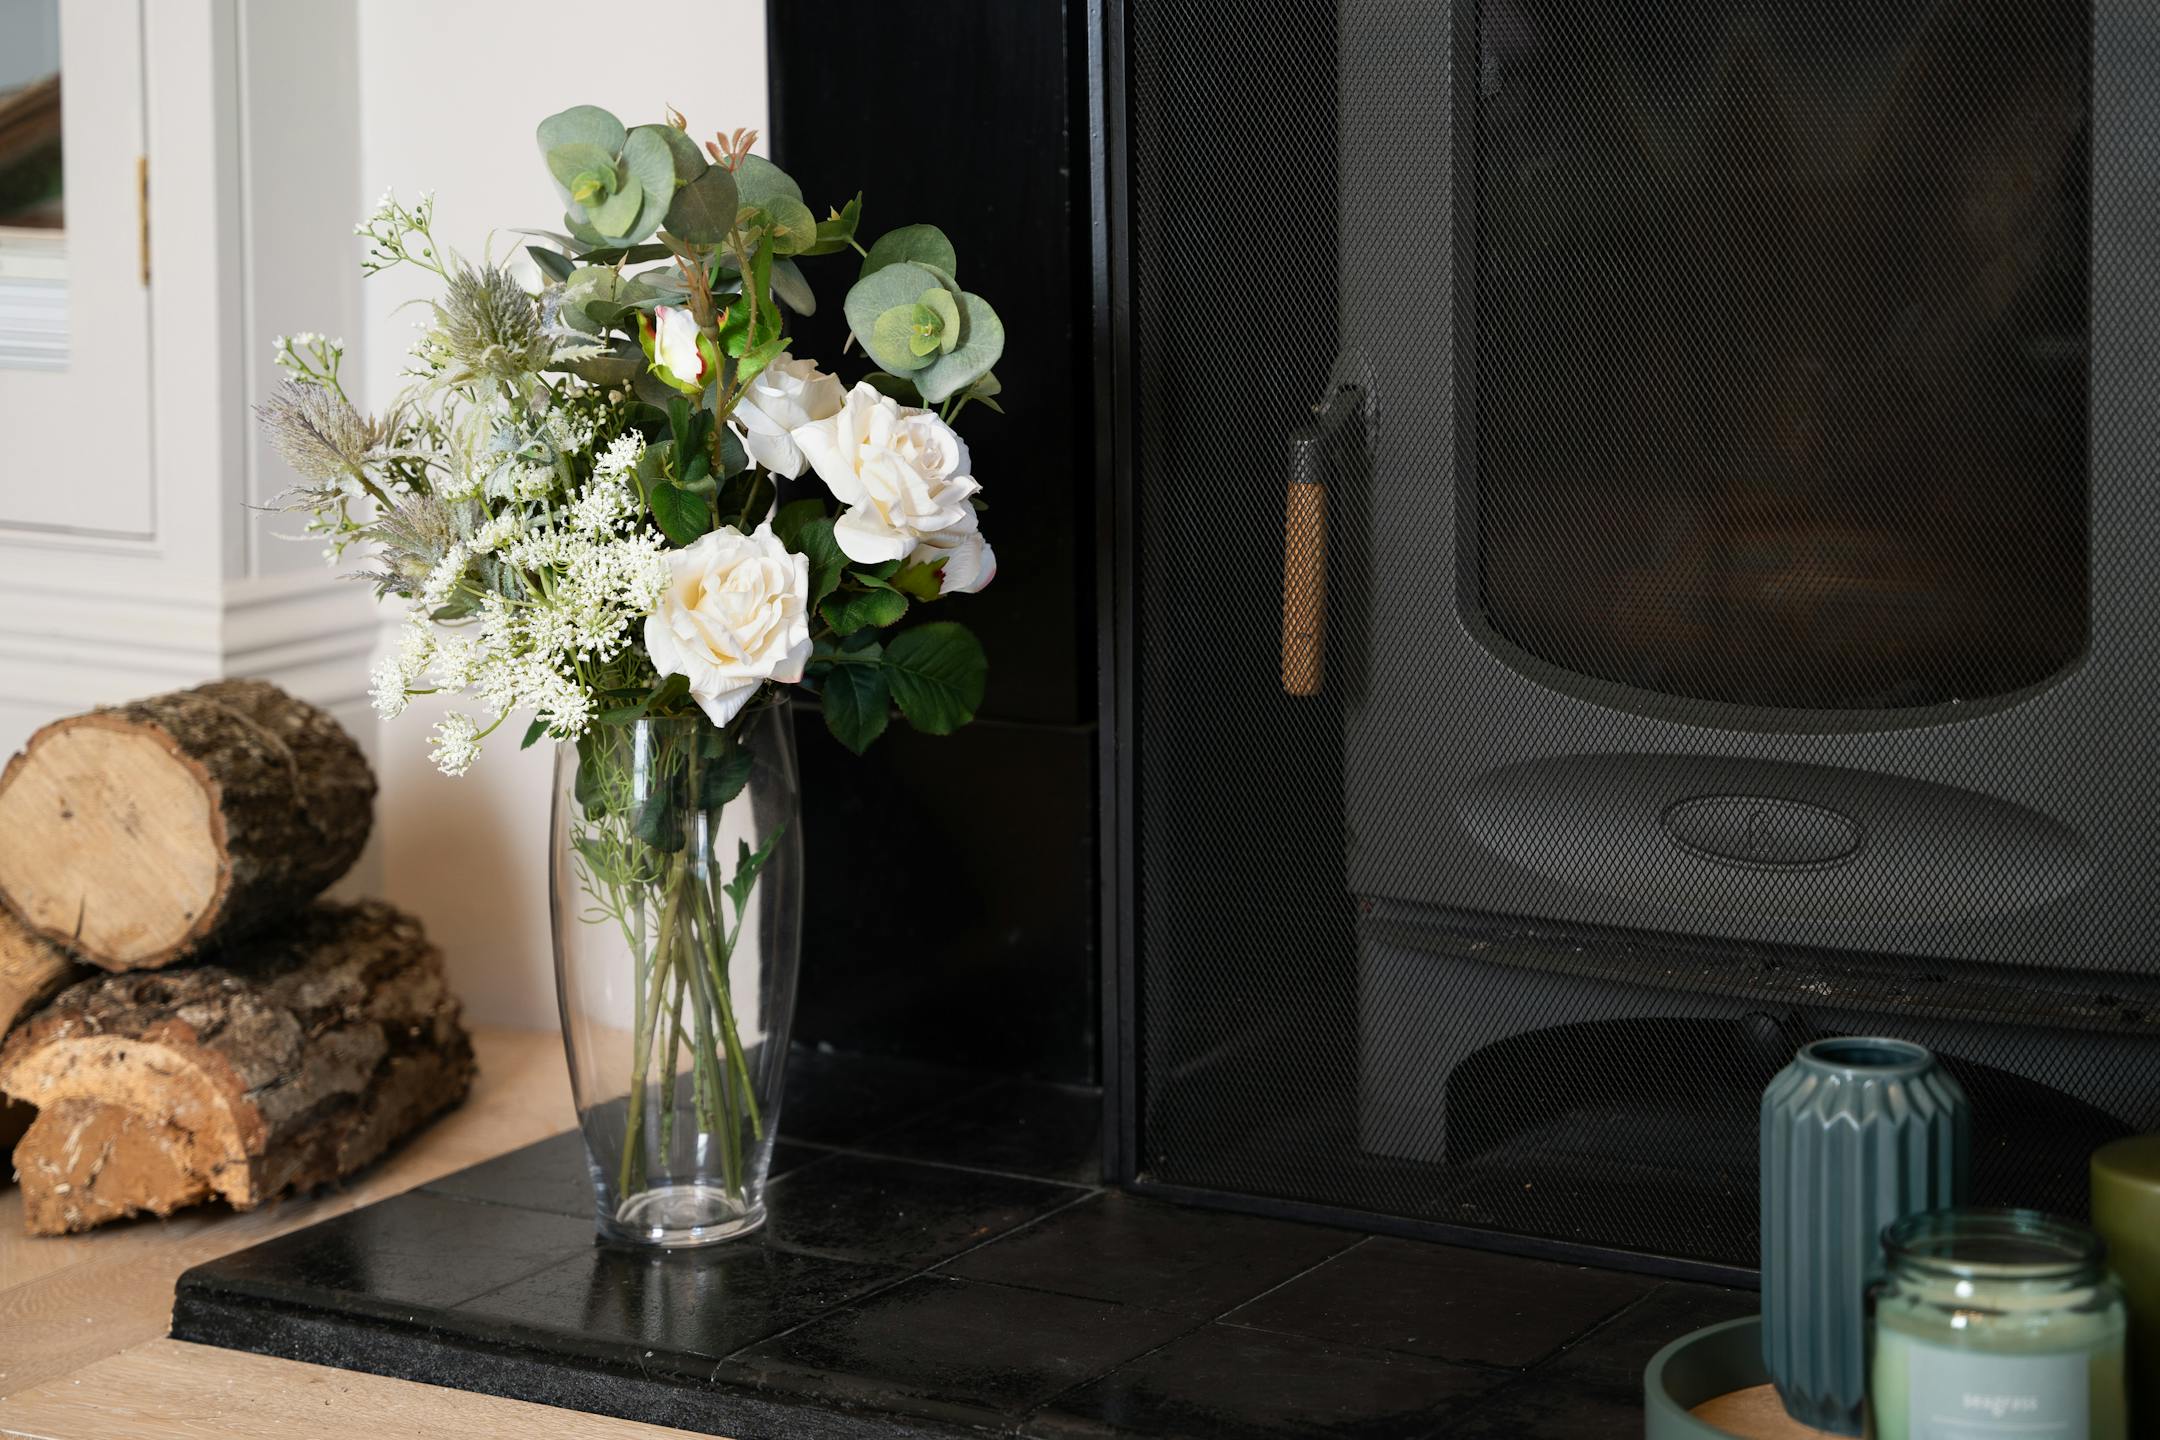 Artificial white enchanting flower bunch next to black fireplace